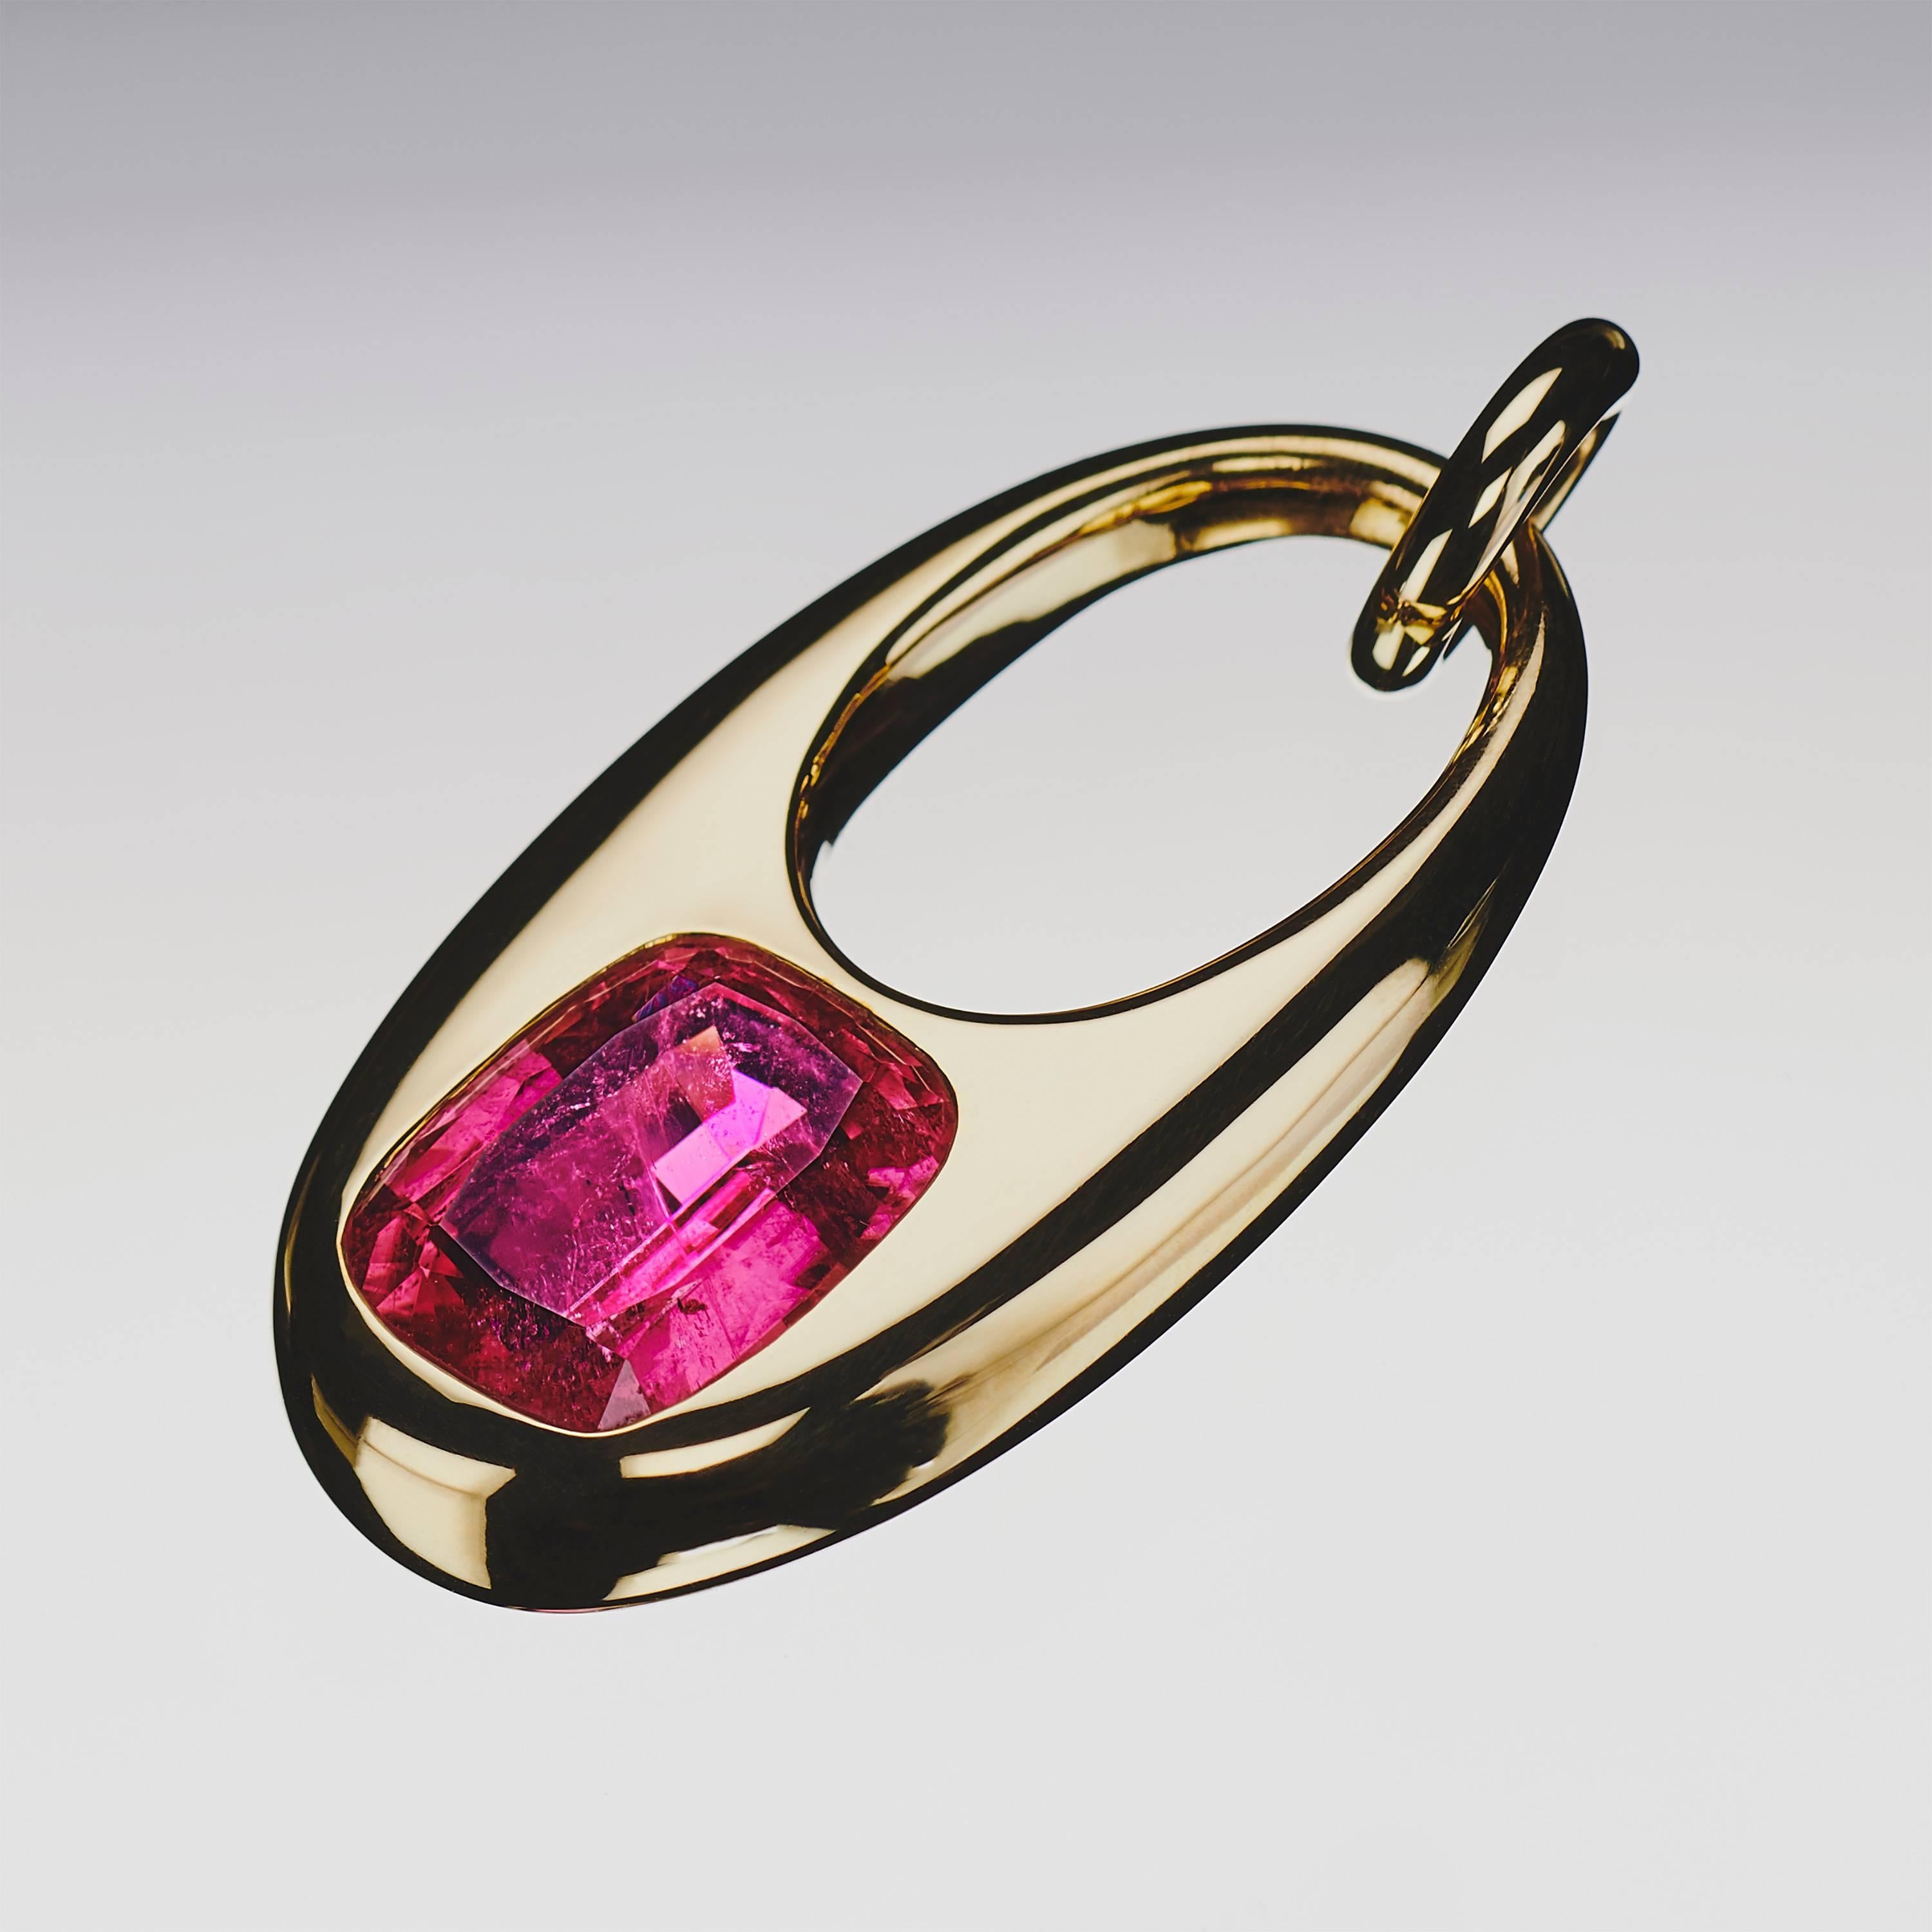 Solid 18ct. gold pendant set with a faceted Brazilian Rubellite, cushion-shape 7.65 cts.
Stamped 750/.
One of a kind, unique piece jewelry, handmade in our workshop.